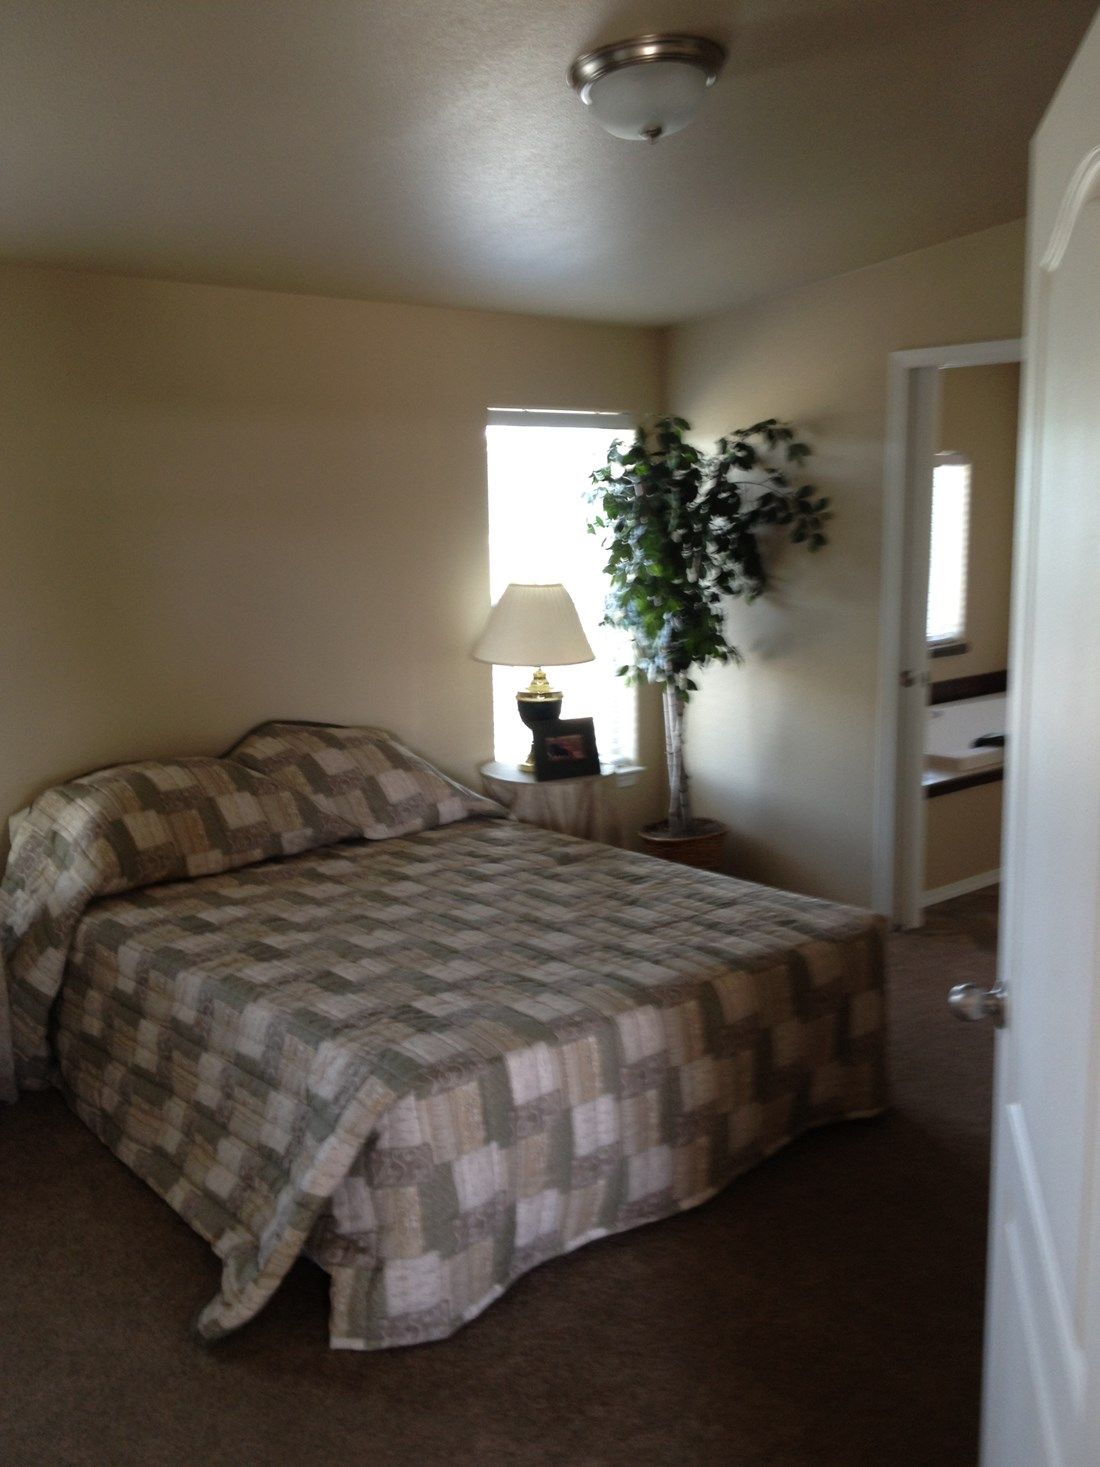 The 2848 MARLETTE SPECIAL Master Bedroom. This Manufactured Mobile Home features 3 bedrooms and 2 baths.